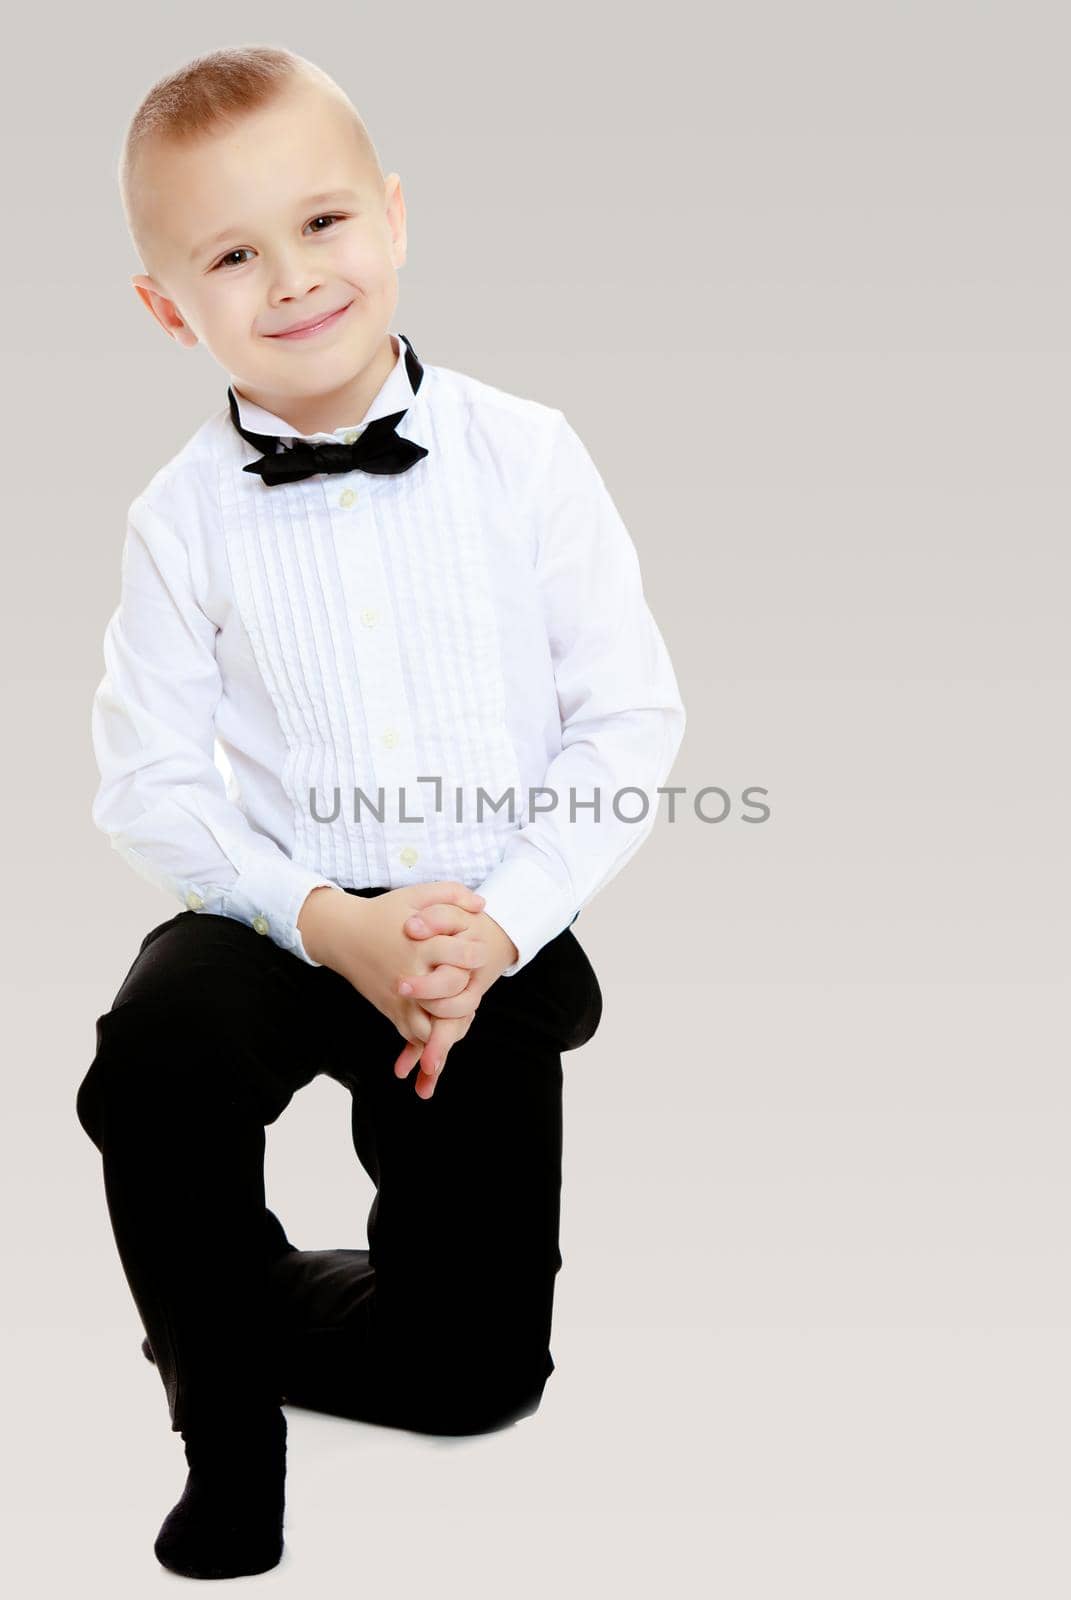 Elegant little boy in black pants ,white shirt and black tie. Standing on one knee.On a gray background.